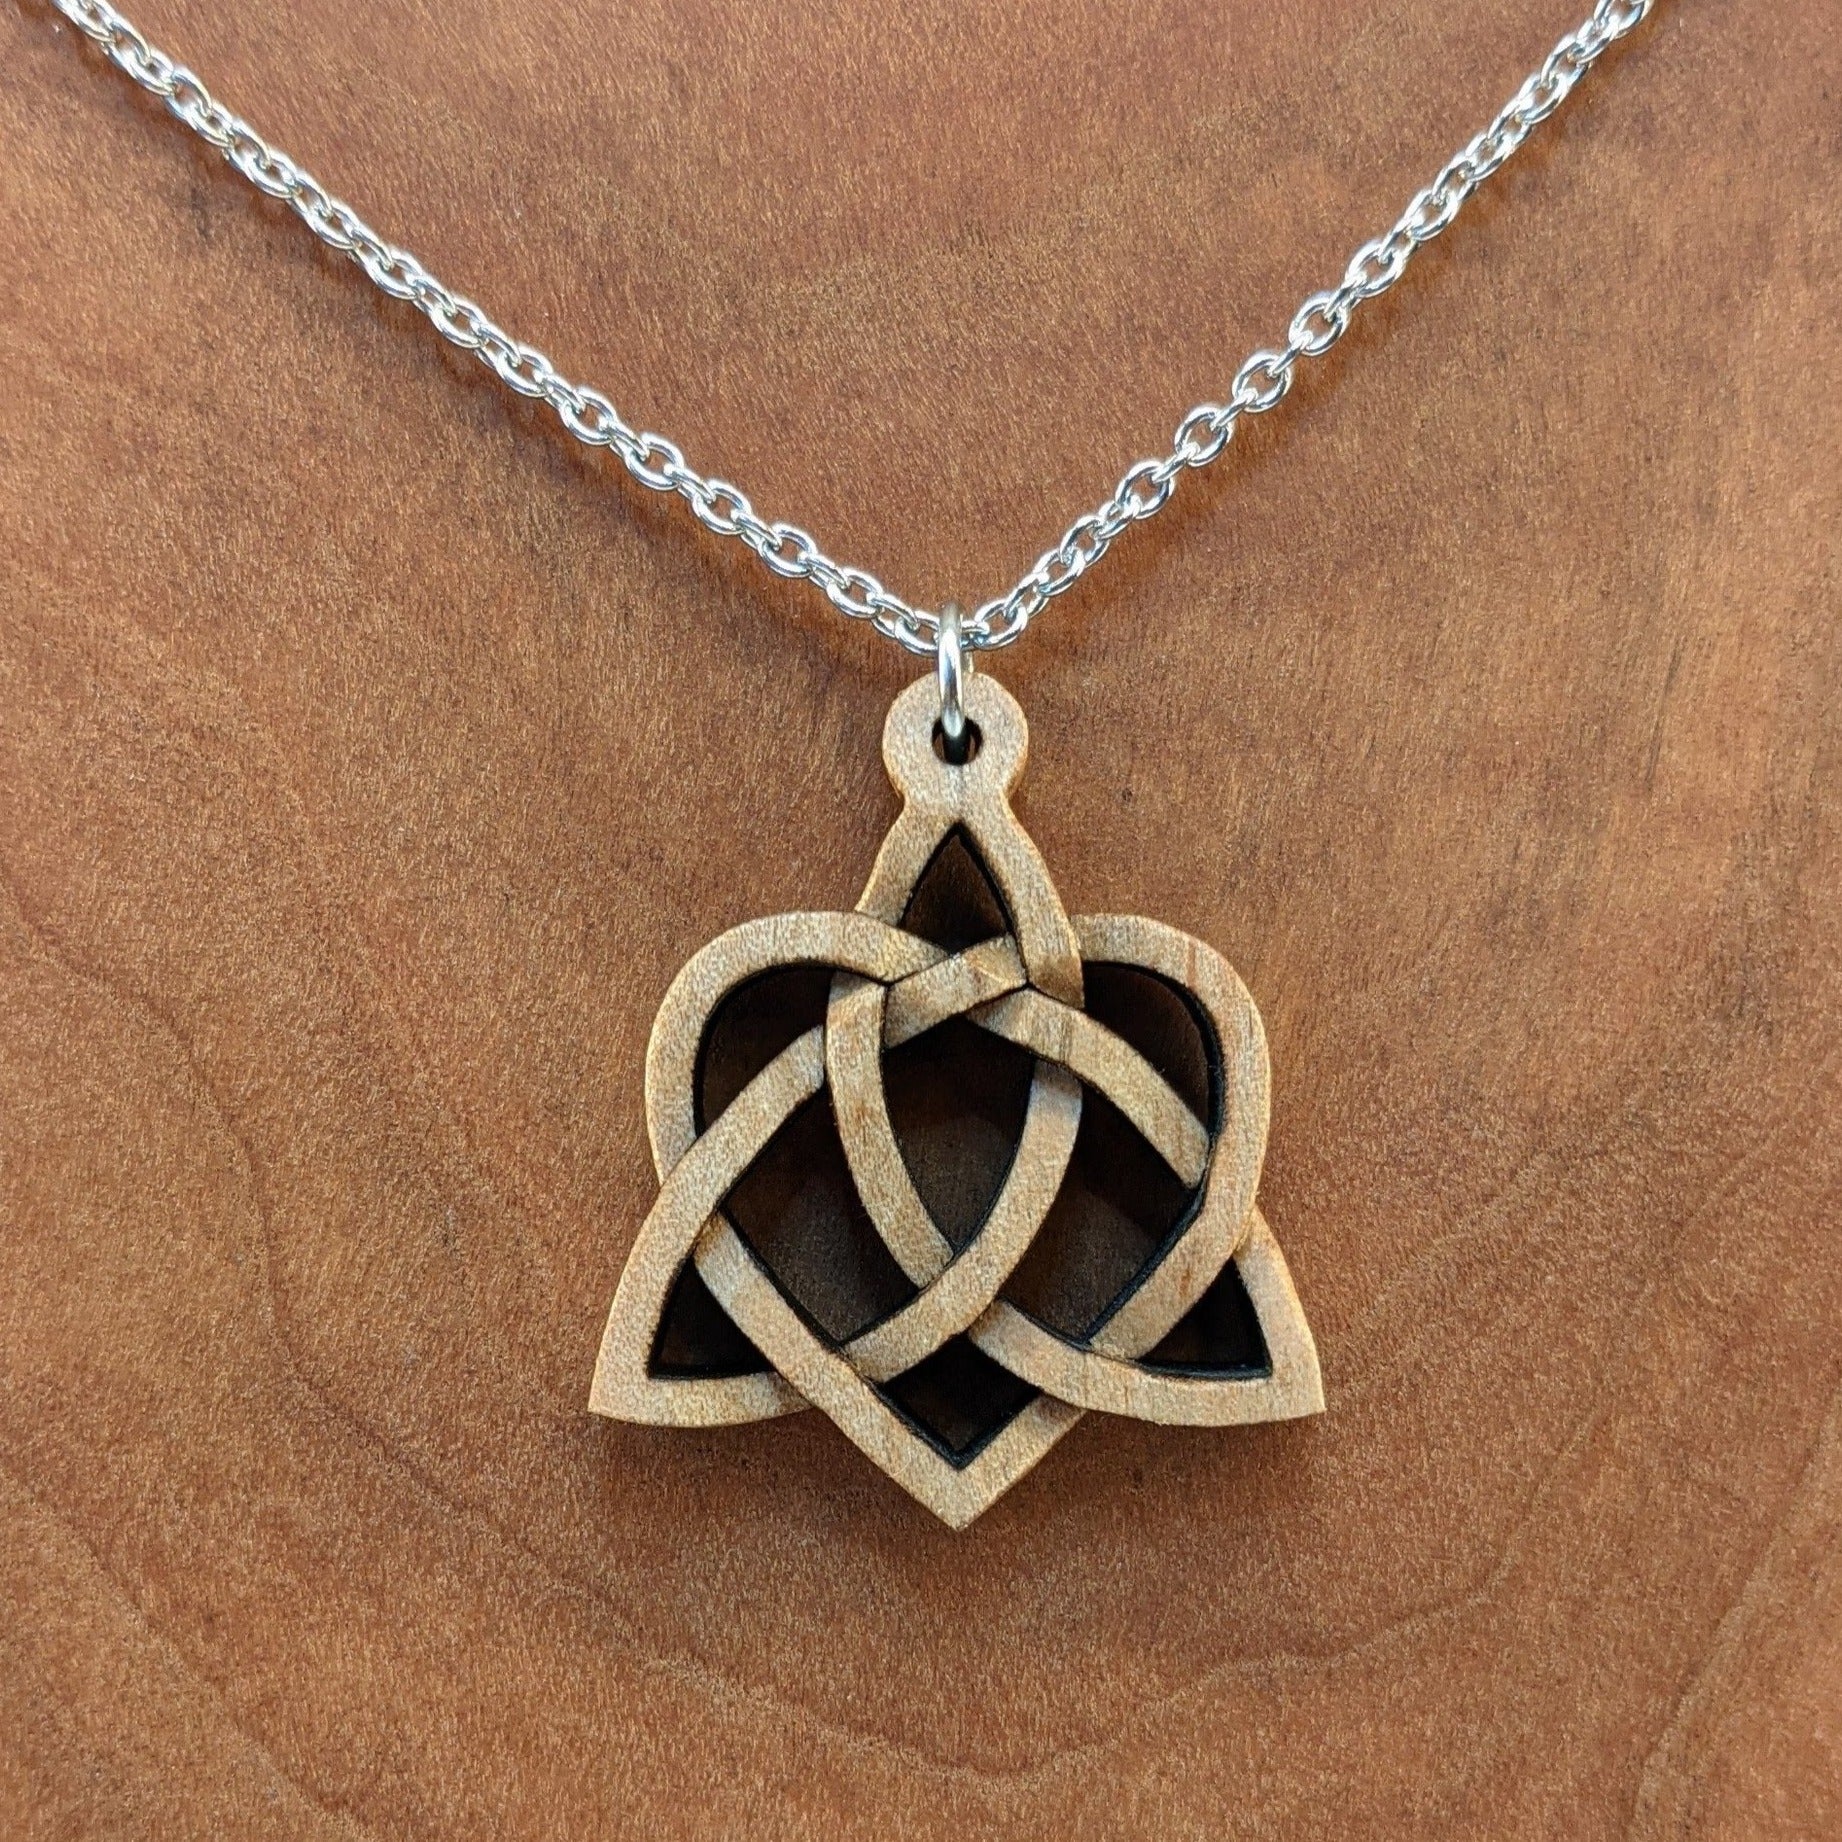 Wooden necklace pendant created in the style of a Celtic weave pattern that is a trinity and heart combined. The symbol represents adoption. Hanging from a silver stainless steel chain against a cherry wood background.